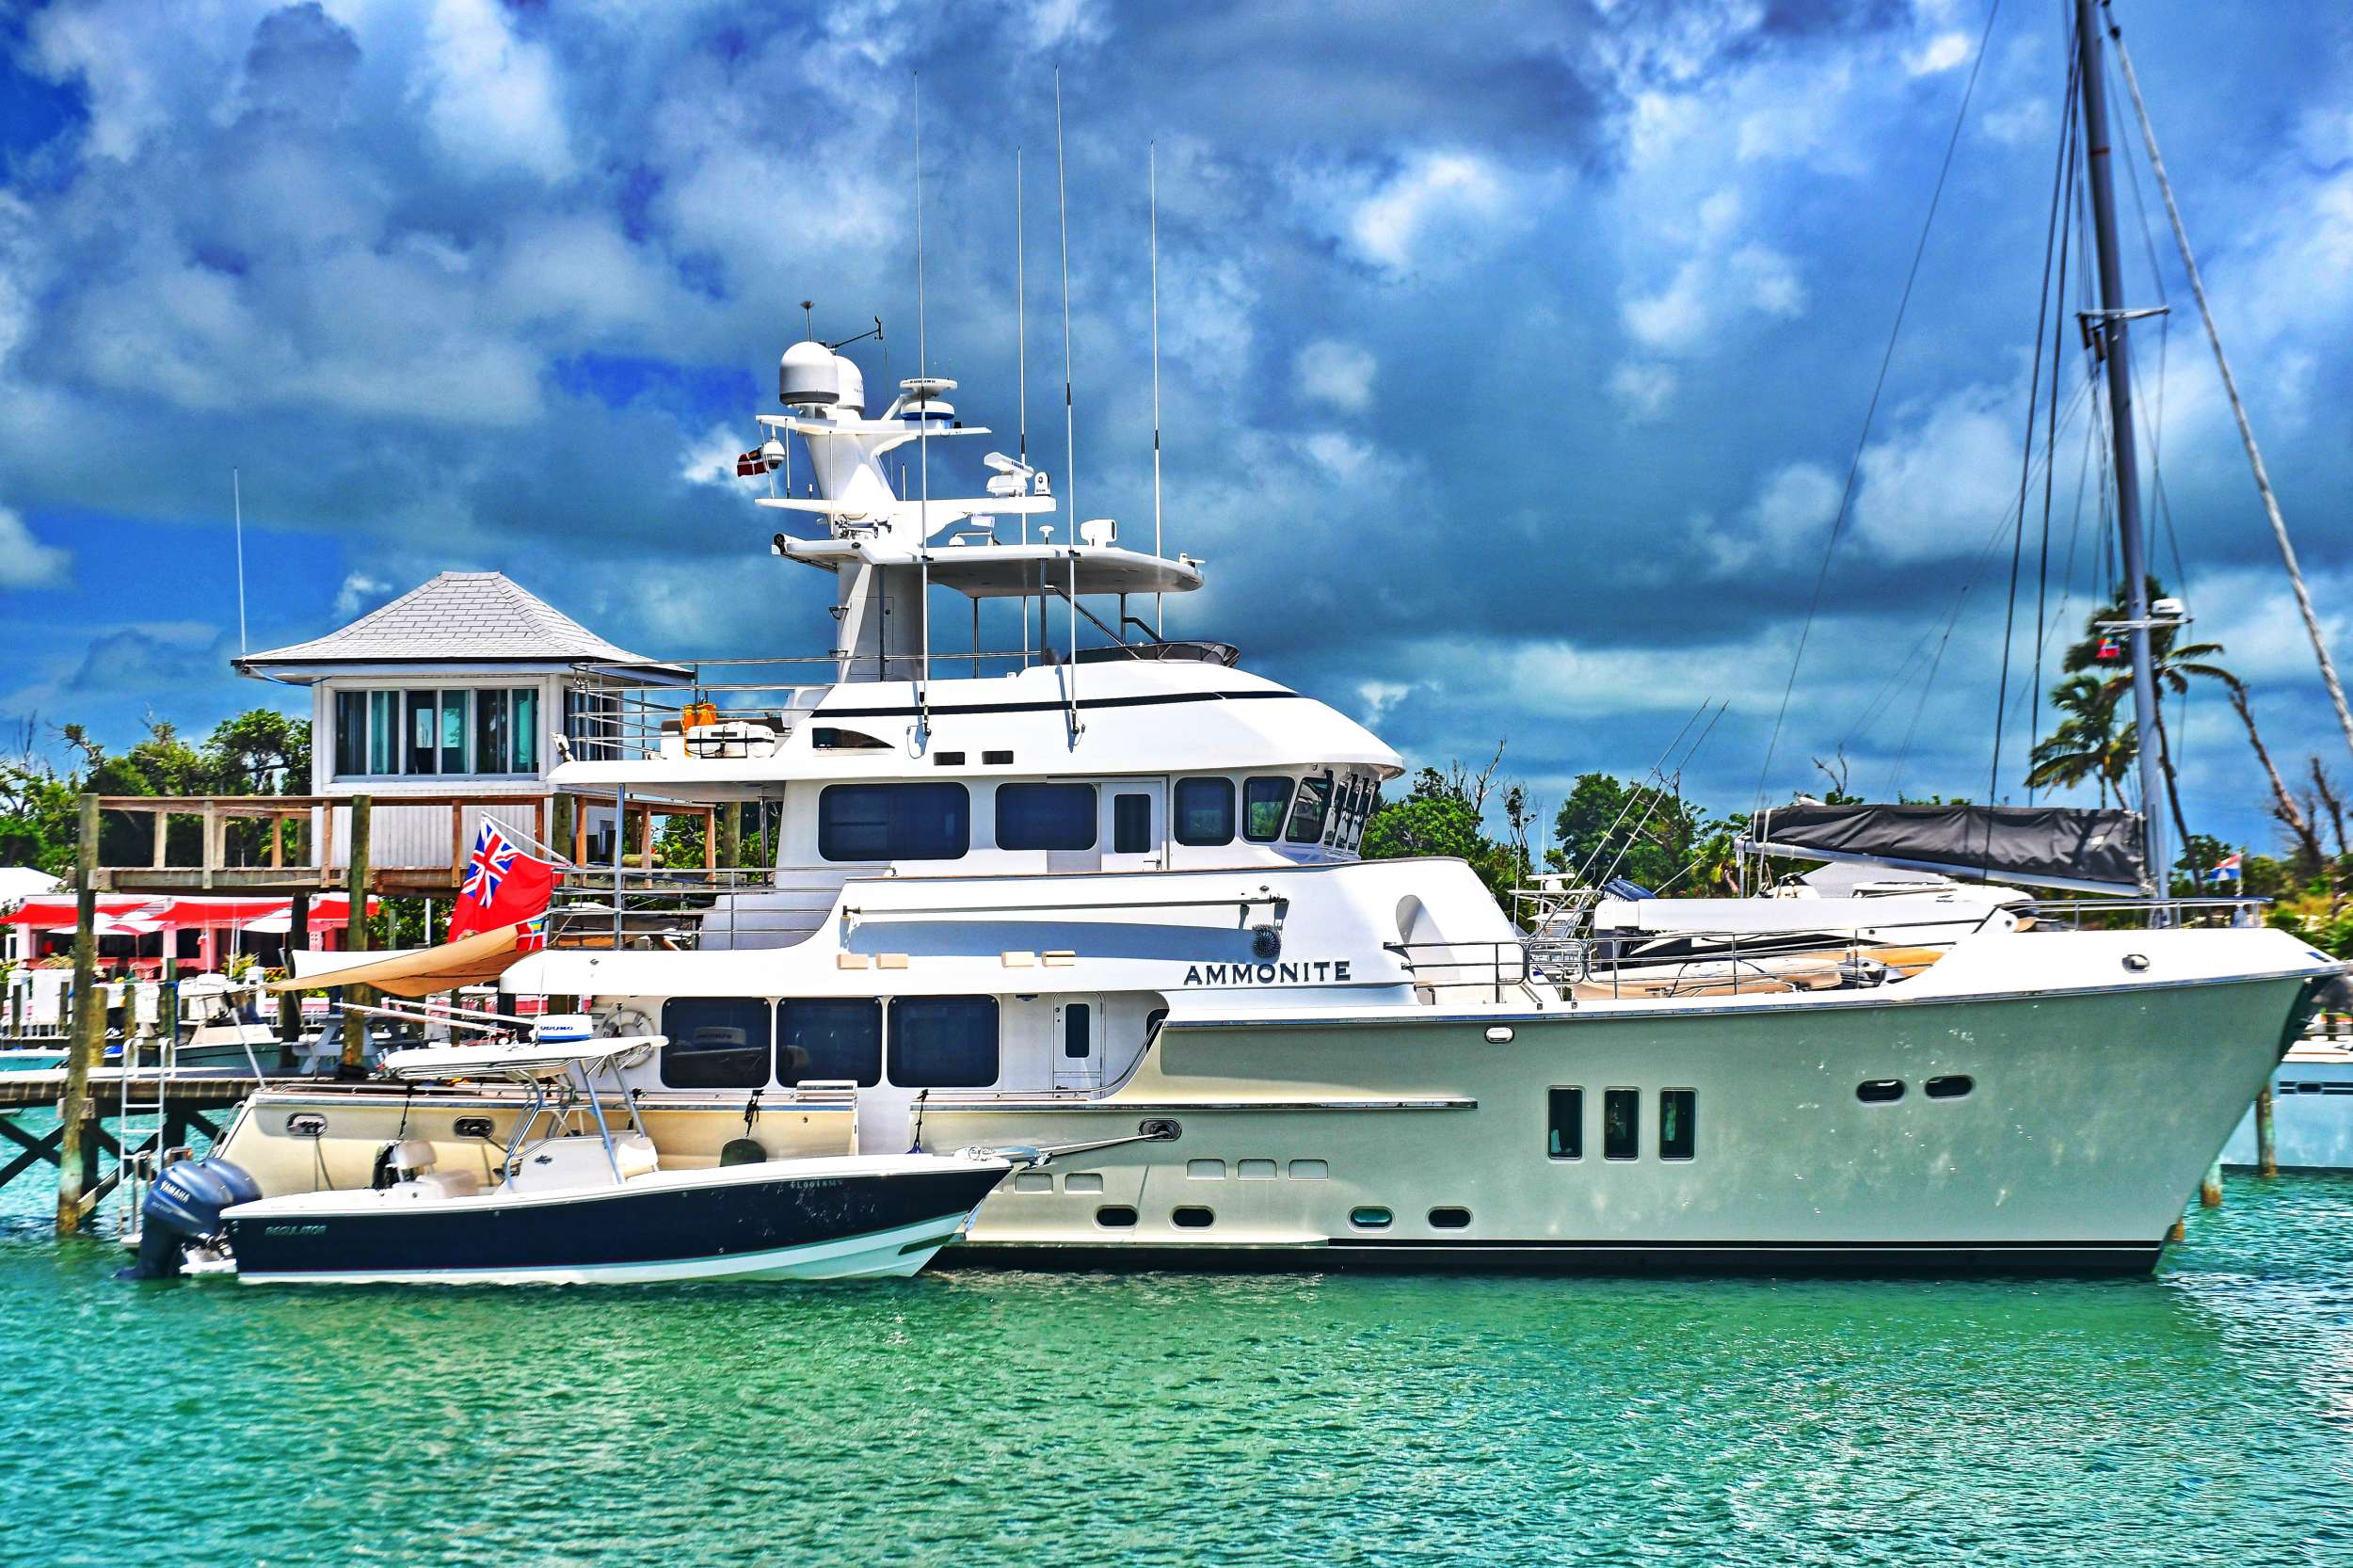 Ammonite is a 78' Nordhavn with a charter base in Marsh Harbour, Abaco. 